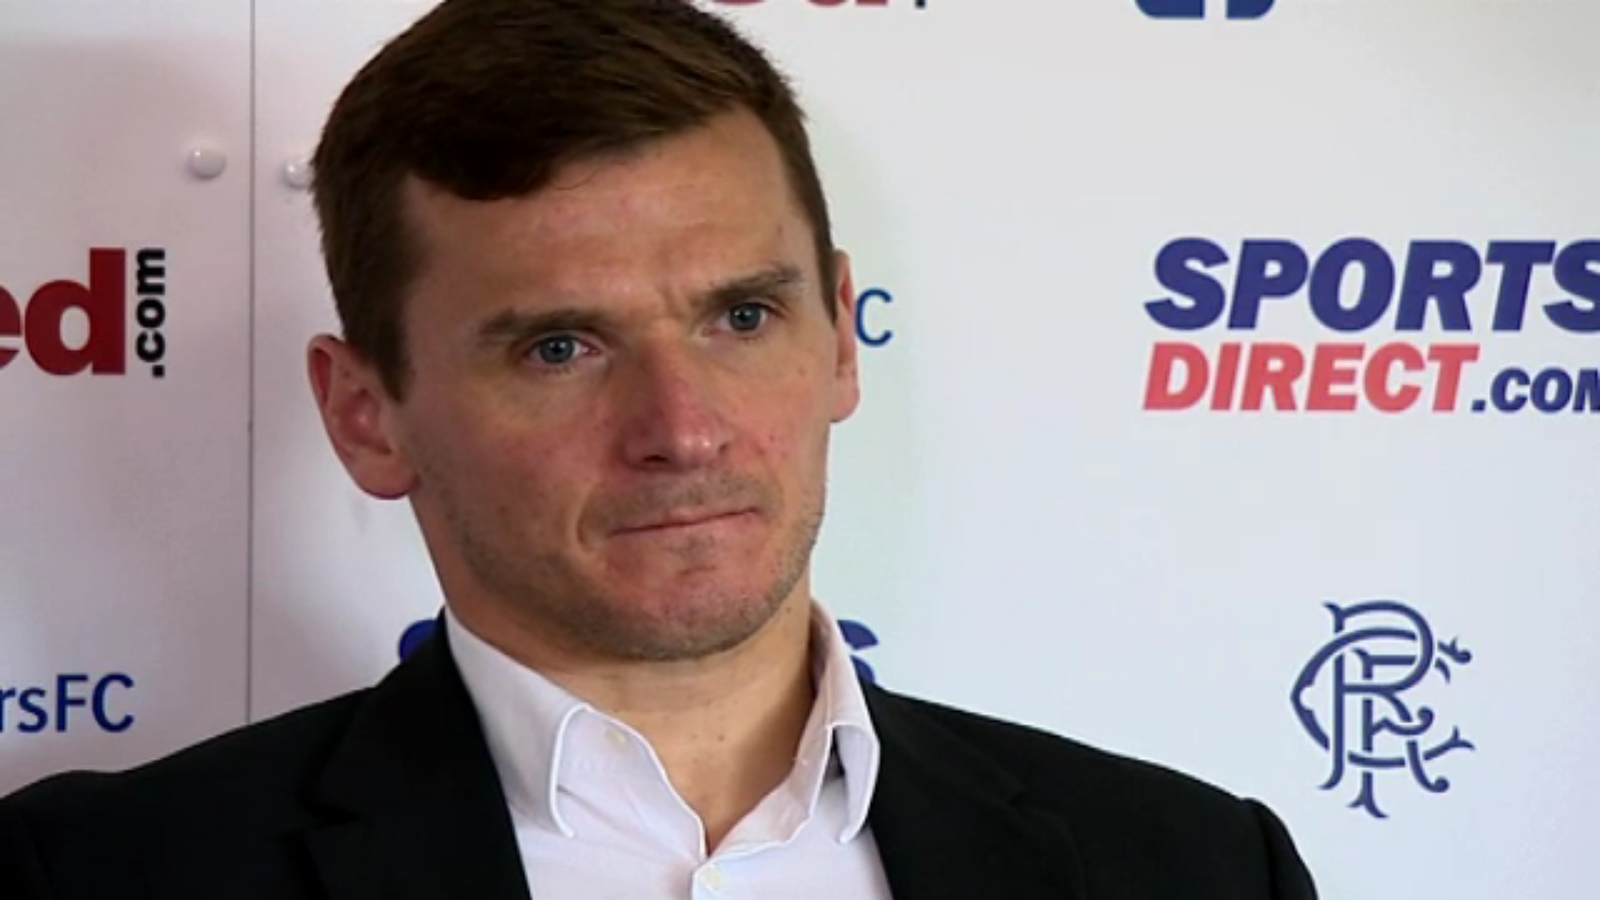 Lee McCulloch: “I’ll win a new deal”